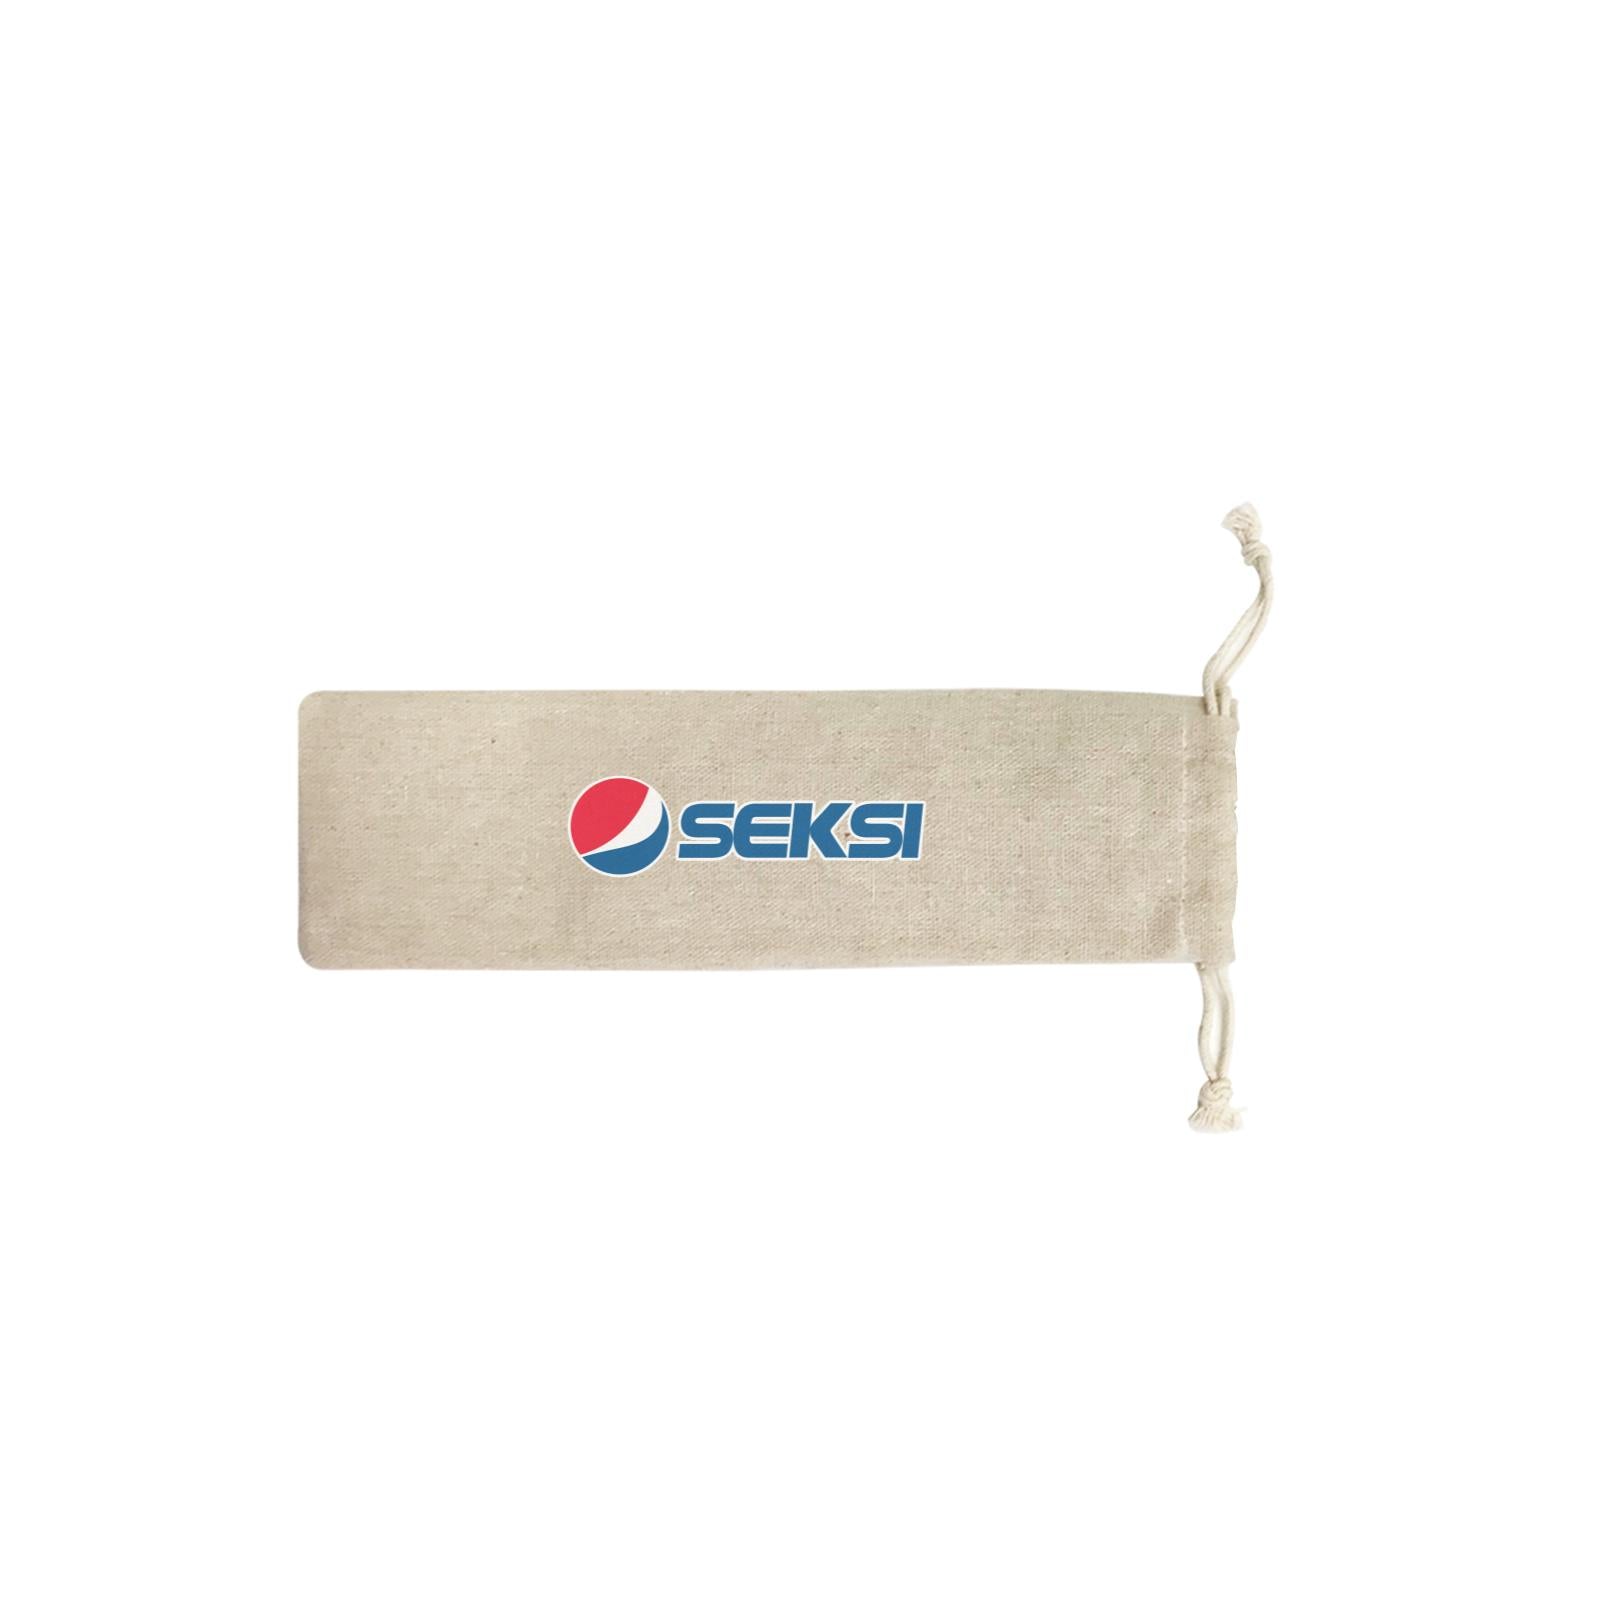 Slang Statement Seksi SB Straw Pouch (No Straws included)